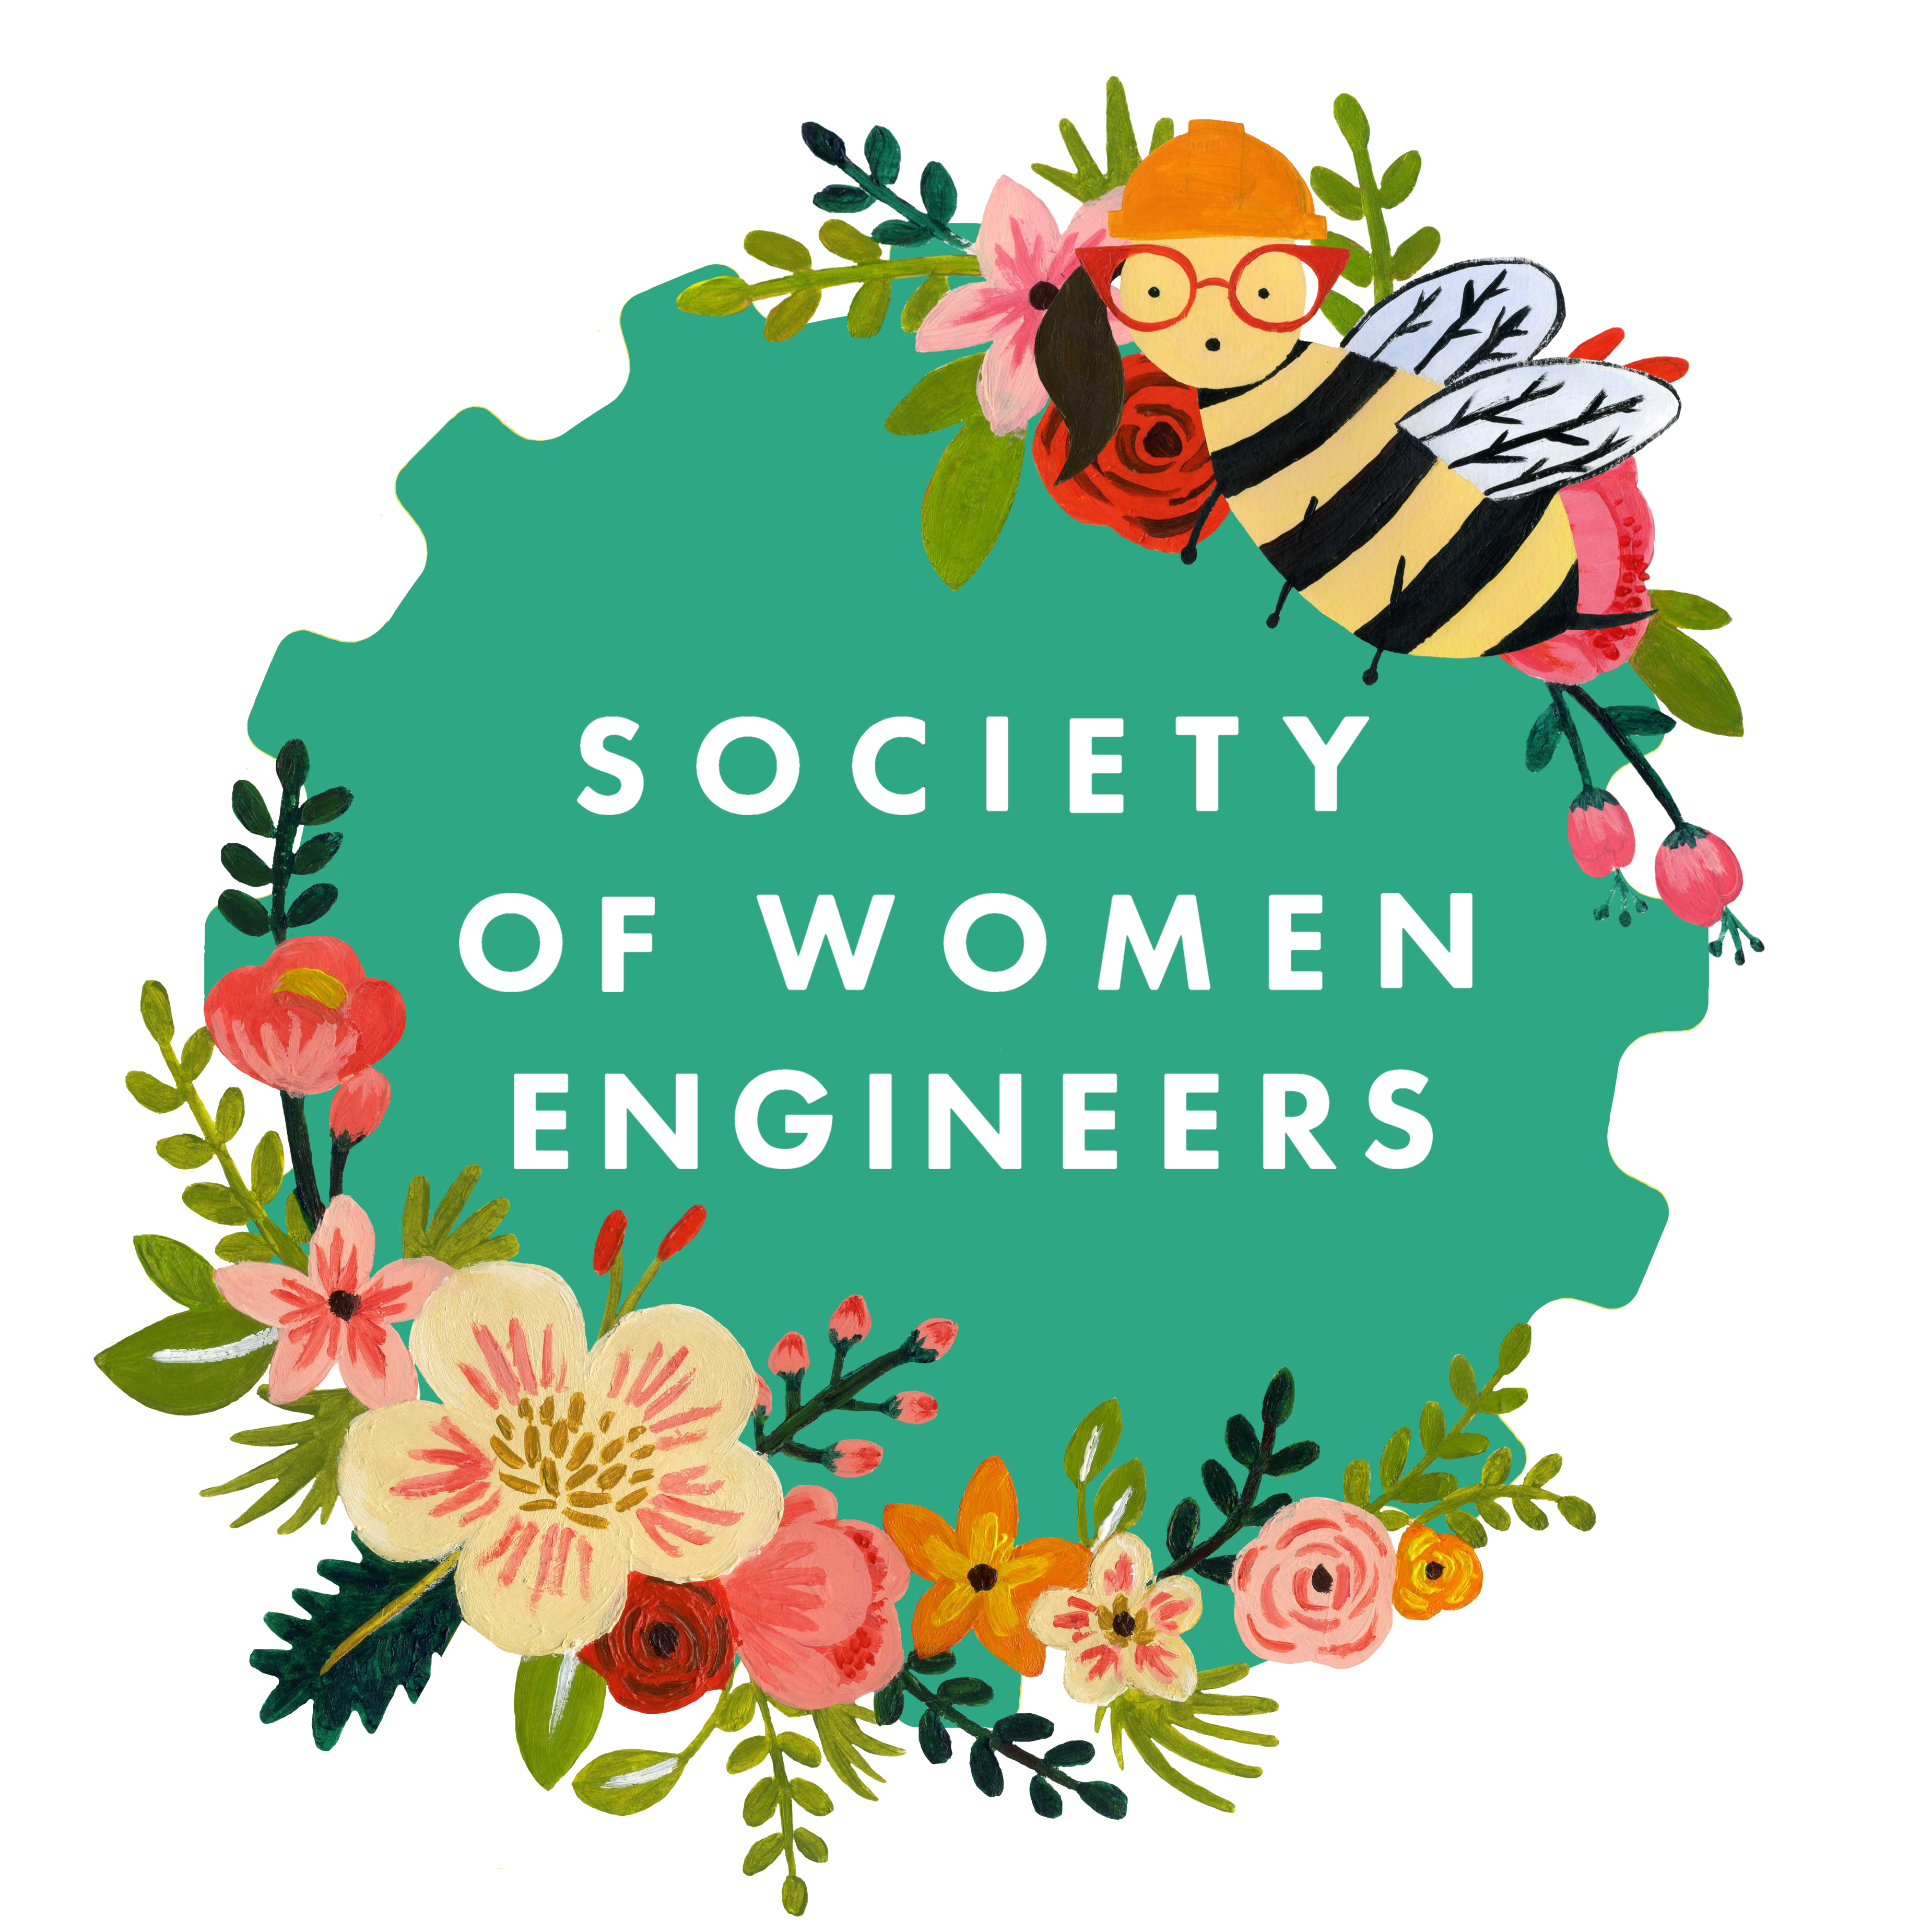 Engineering clipart woman engineer. About society of women